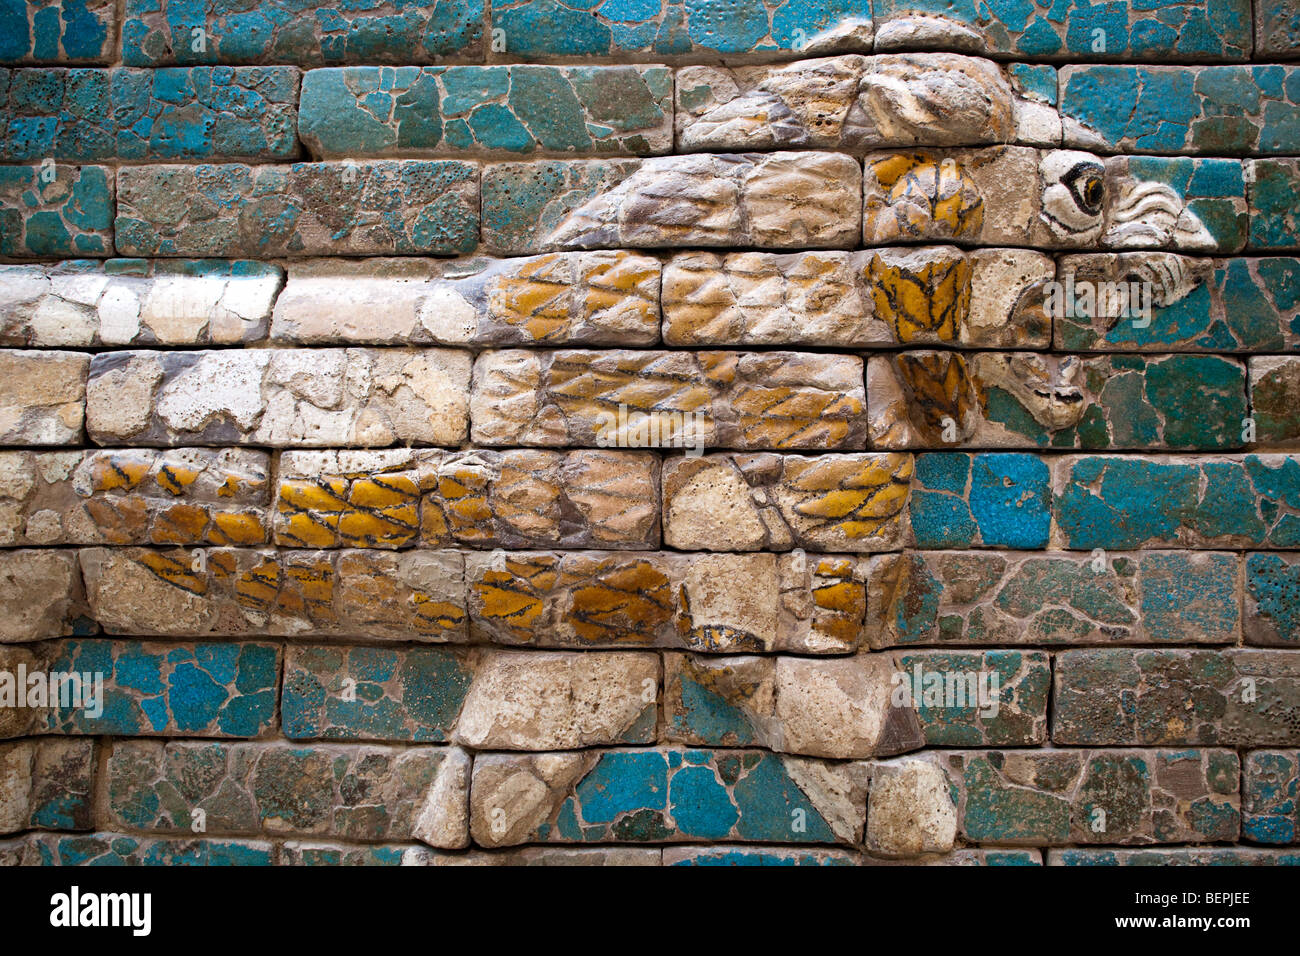 Lion in glazed ceramic from the processional way of Ishtar Gate (Babylon), Pergamon Museum, Berlin, Germany Stock Photo